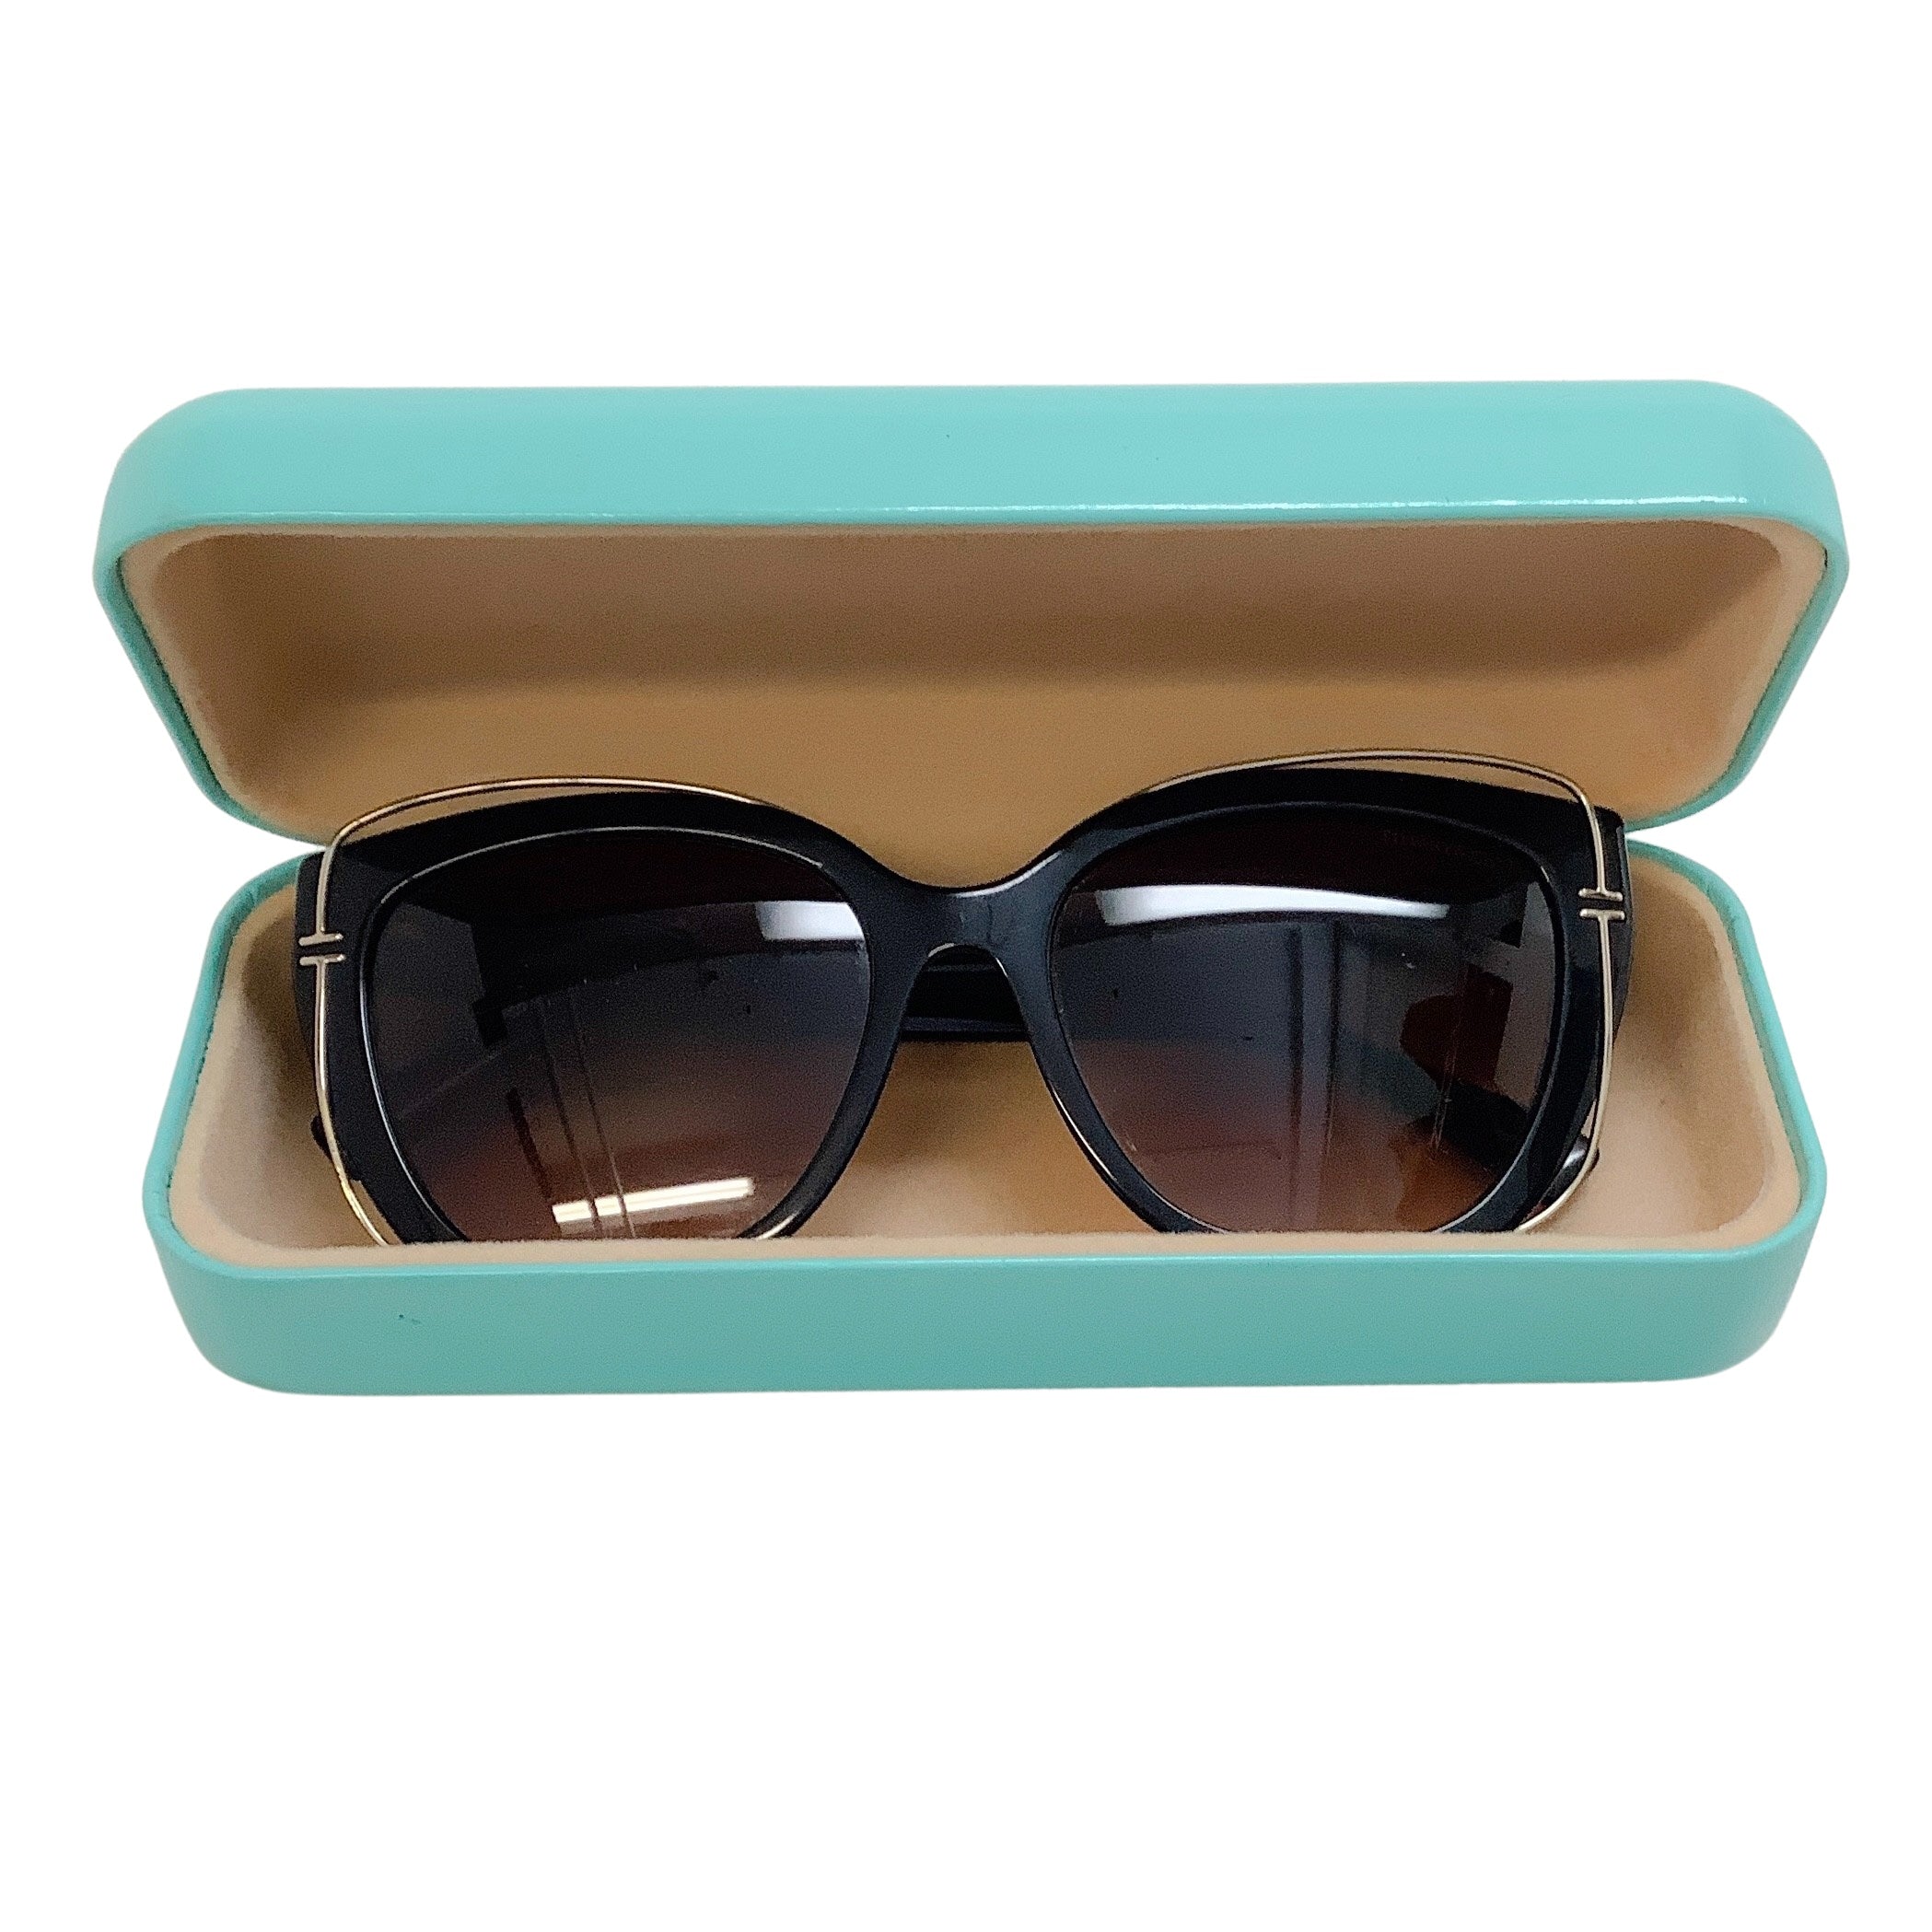 Tiffany & Co. 4148 Black with Gold Detail Cat Eye Sunglasses